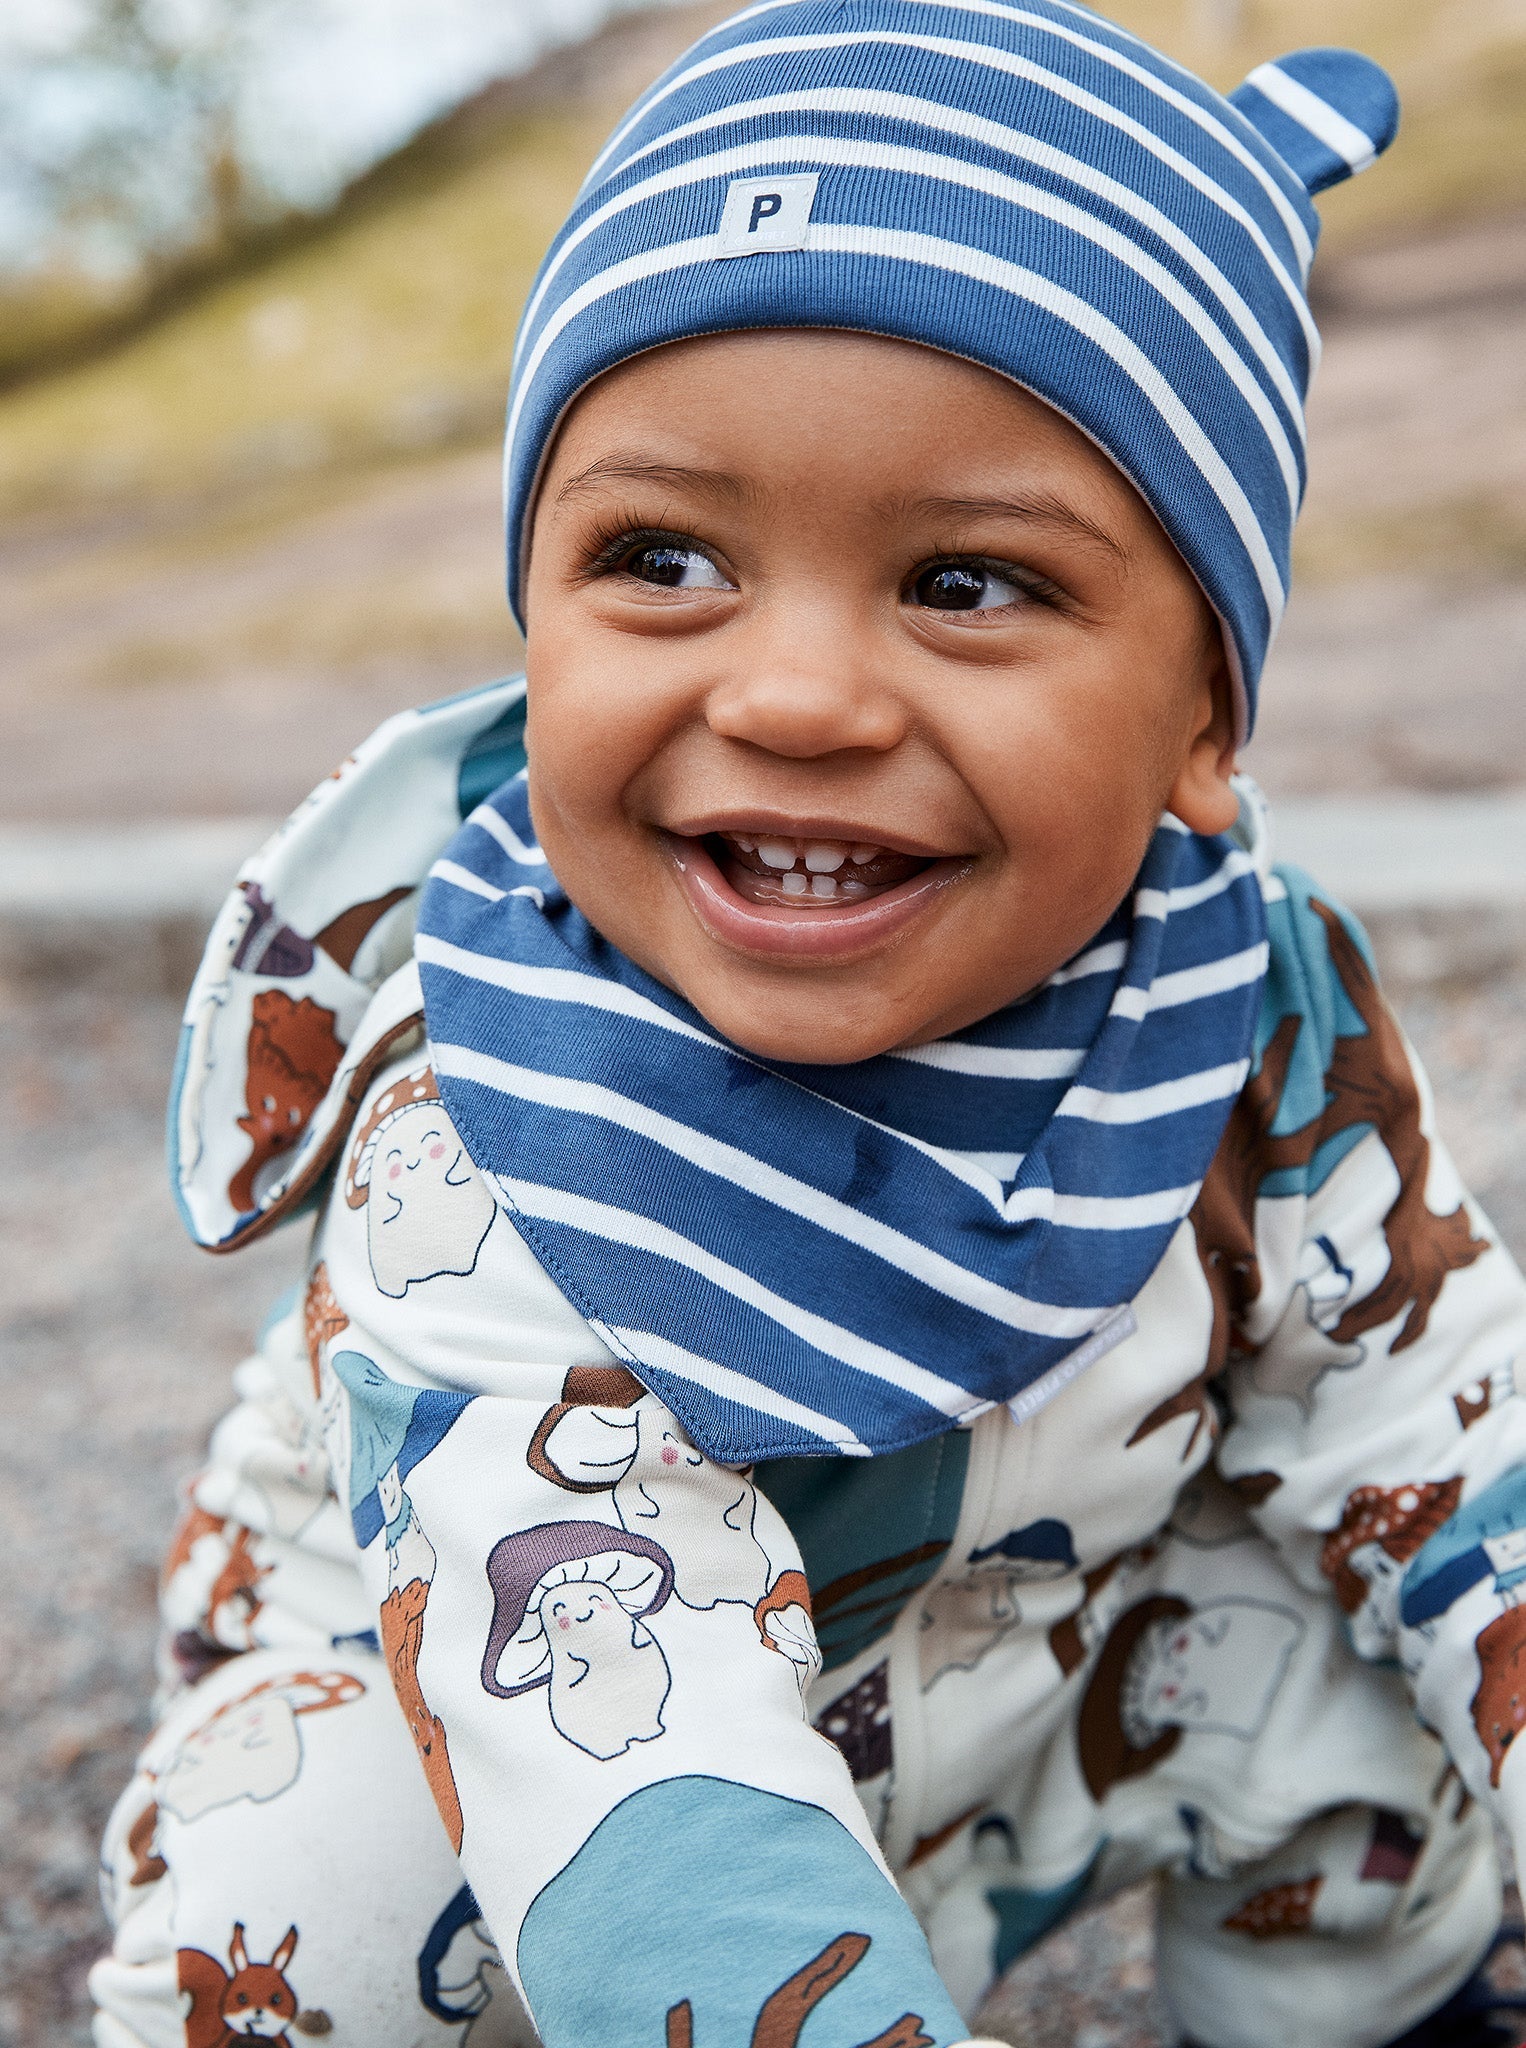 Organic Cotton Blue Baby Beanie Hat from the Polarn O. Pyret Kidswear collection. The best ethical kids clothes